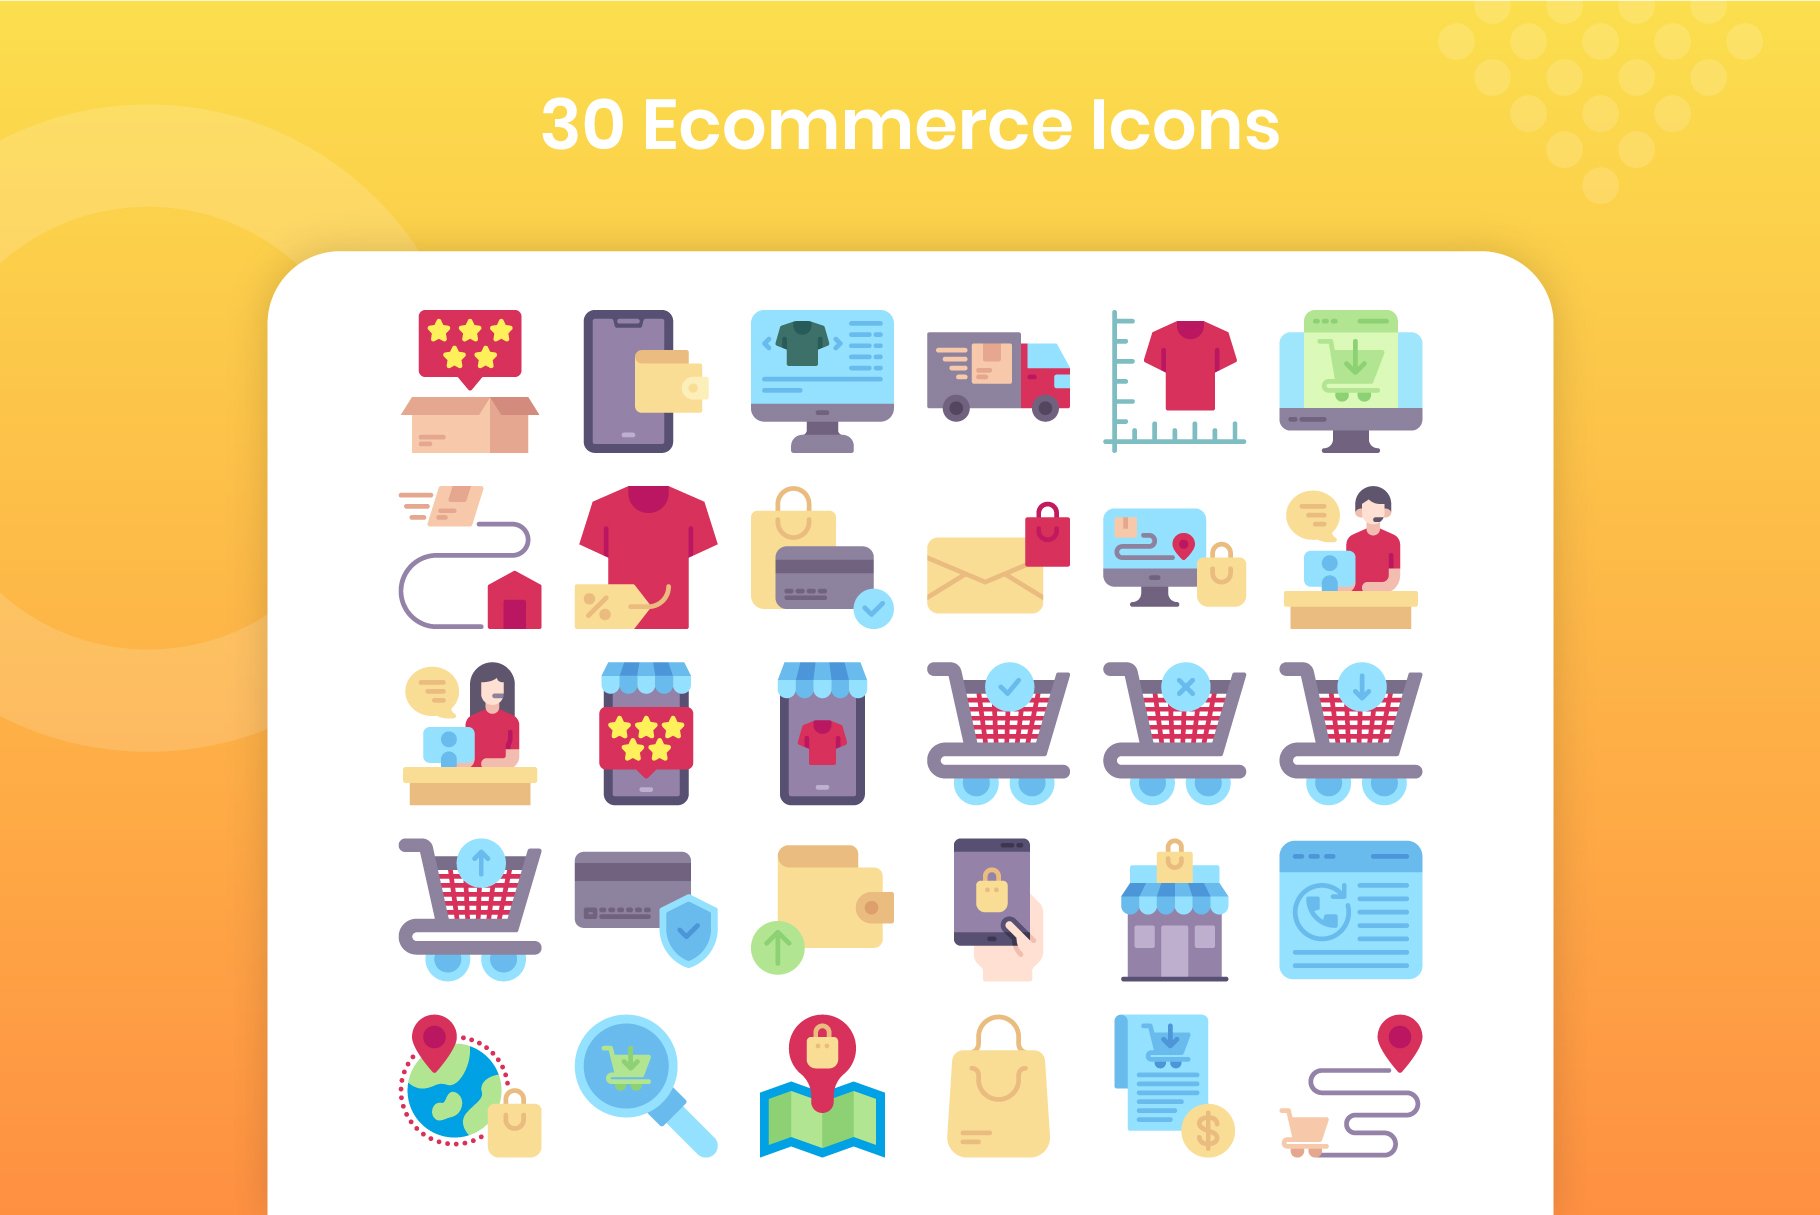 30 Ecommerce Icons Set - Flat preview image.